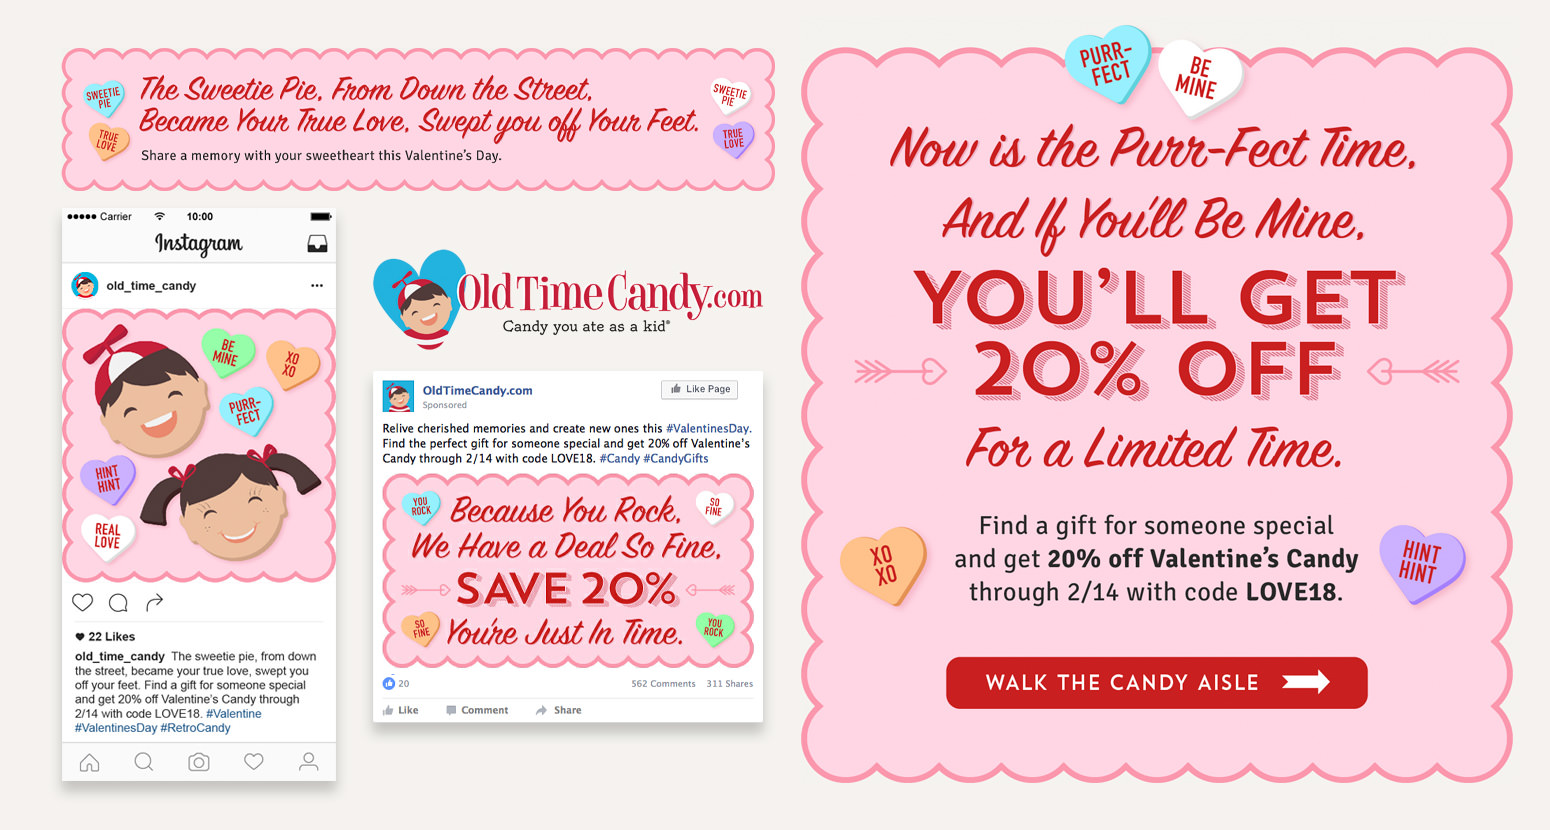 A Valentine's Day promotional campaign for OldTimeCandy.com.